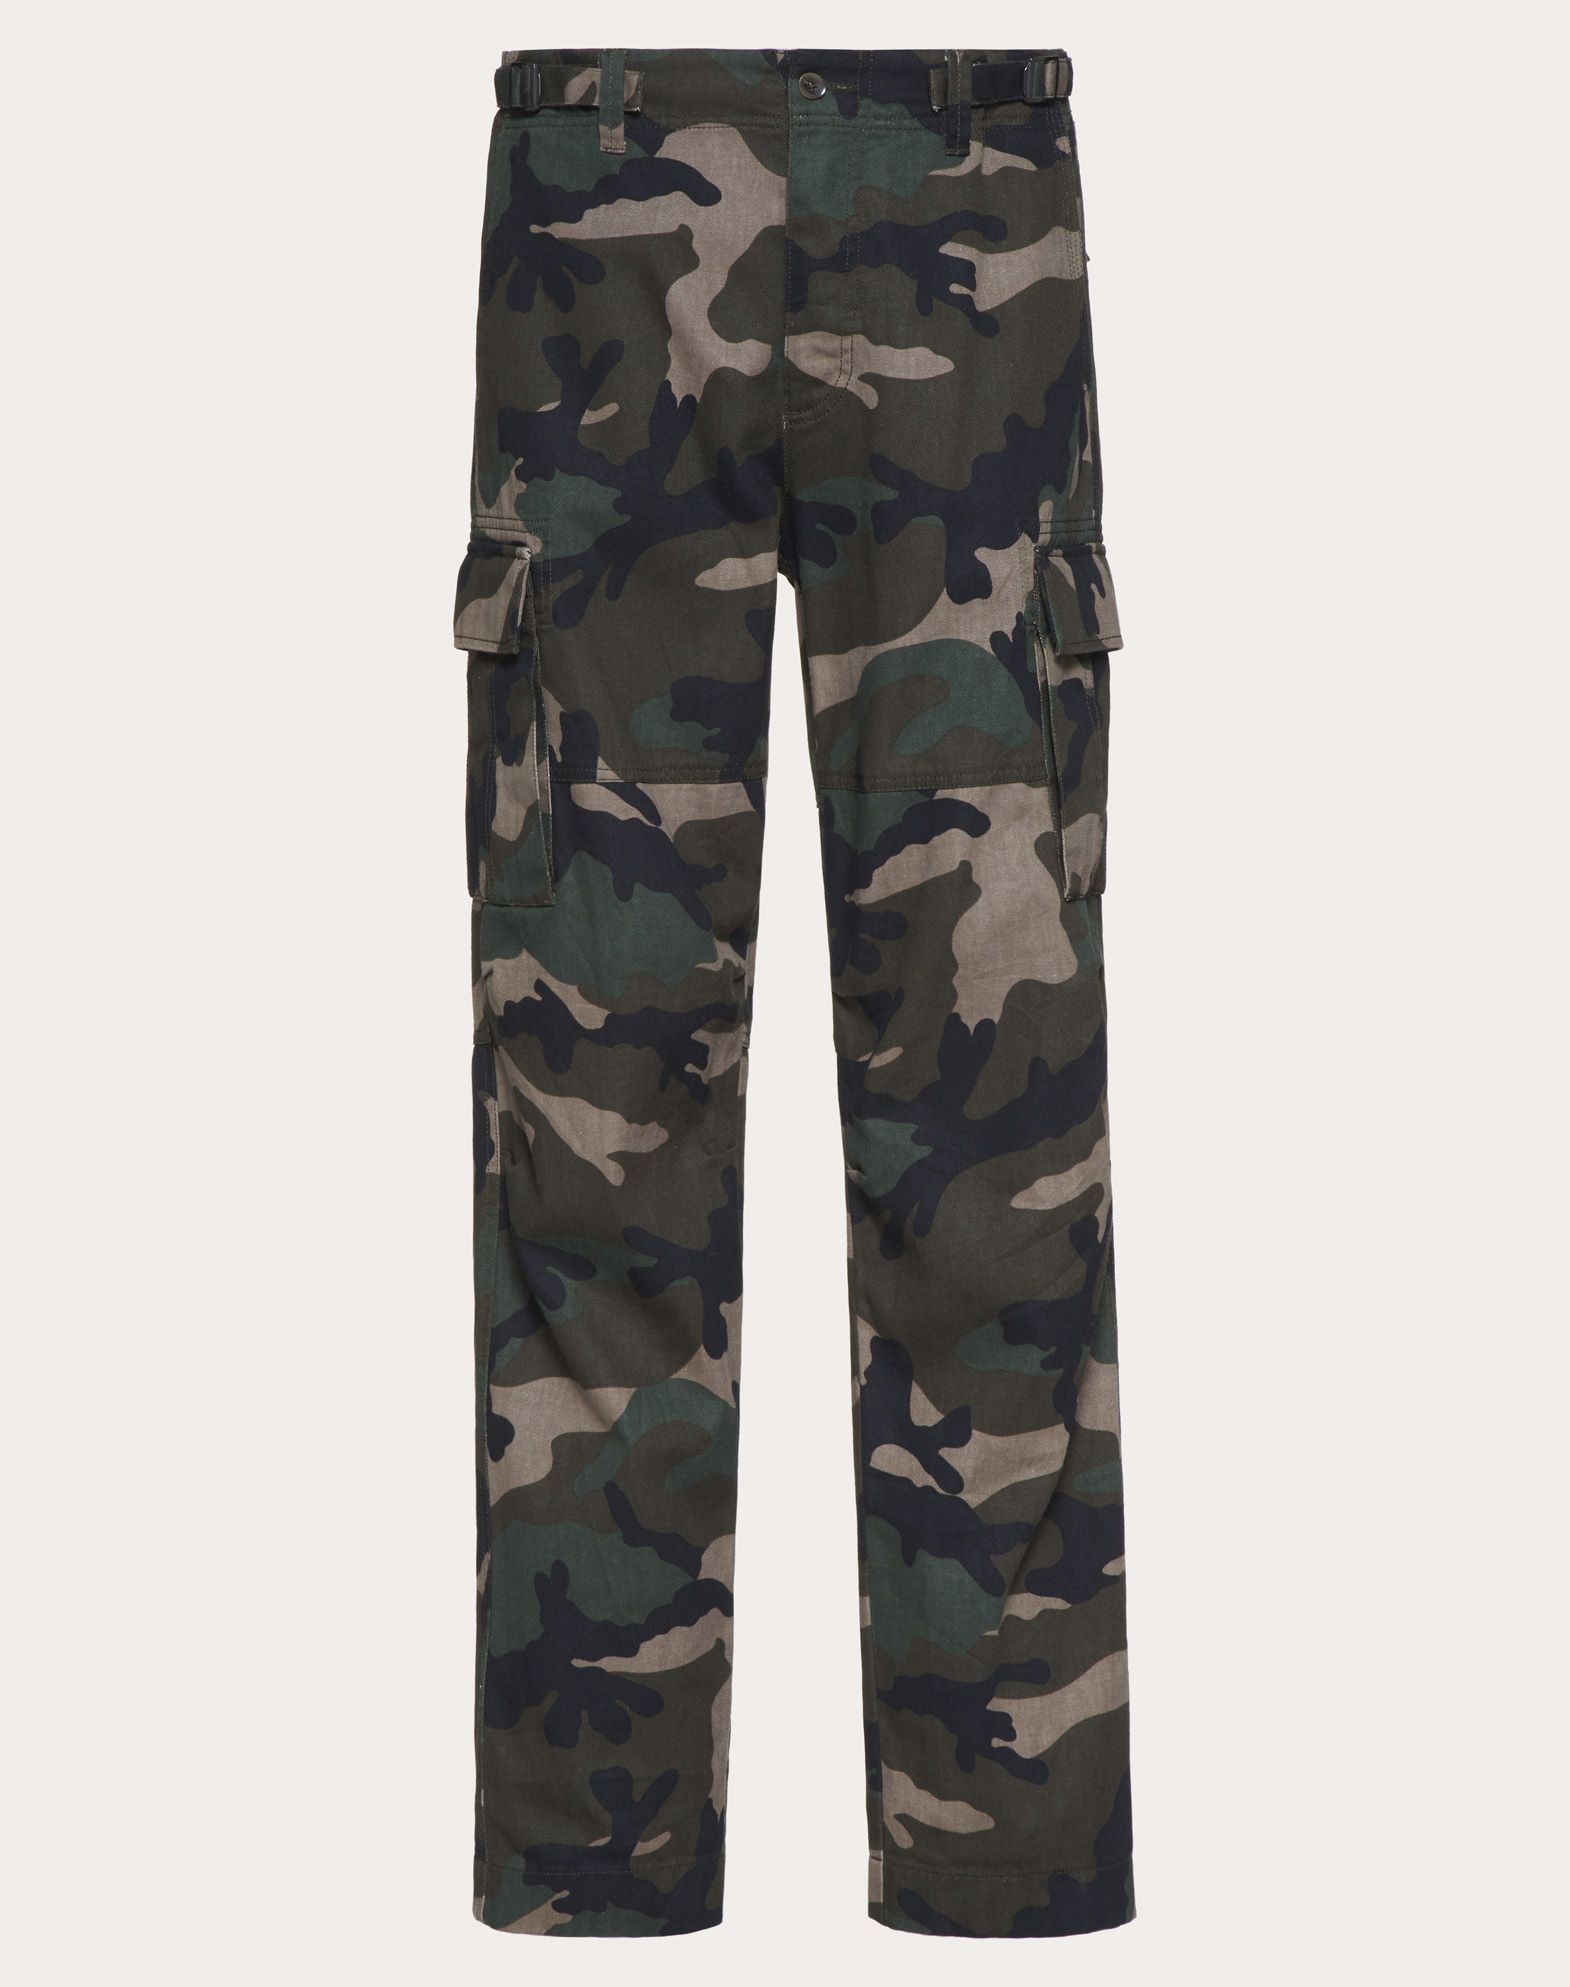 camouflage pants for men